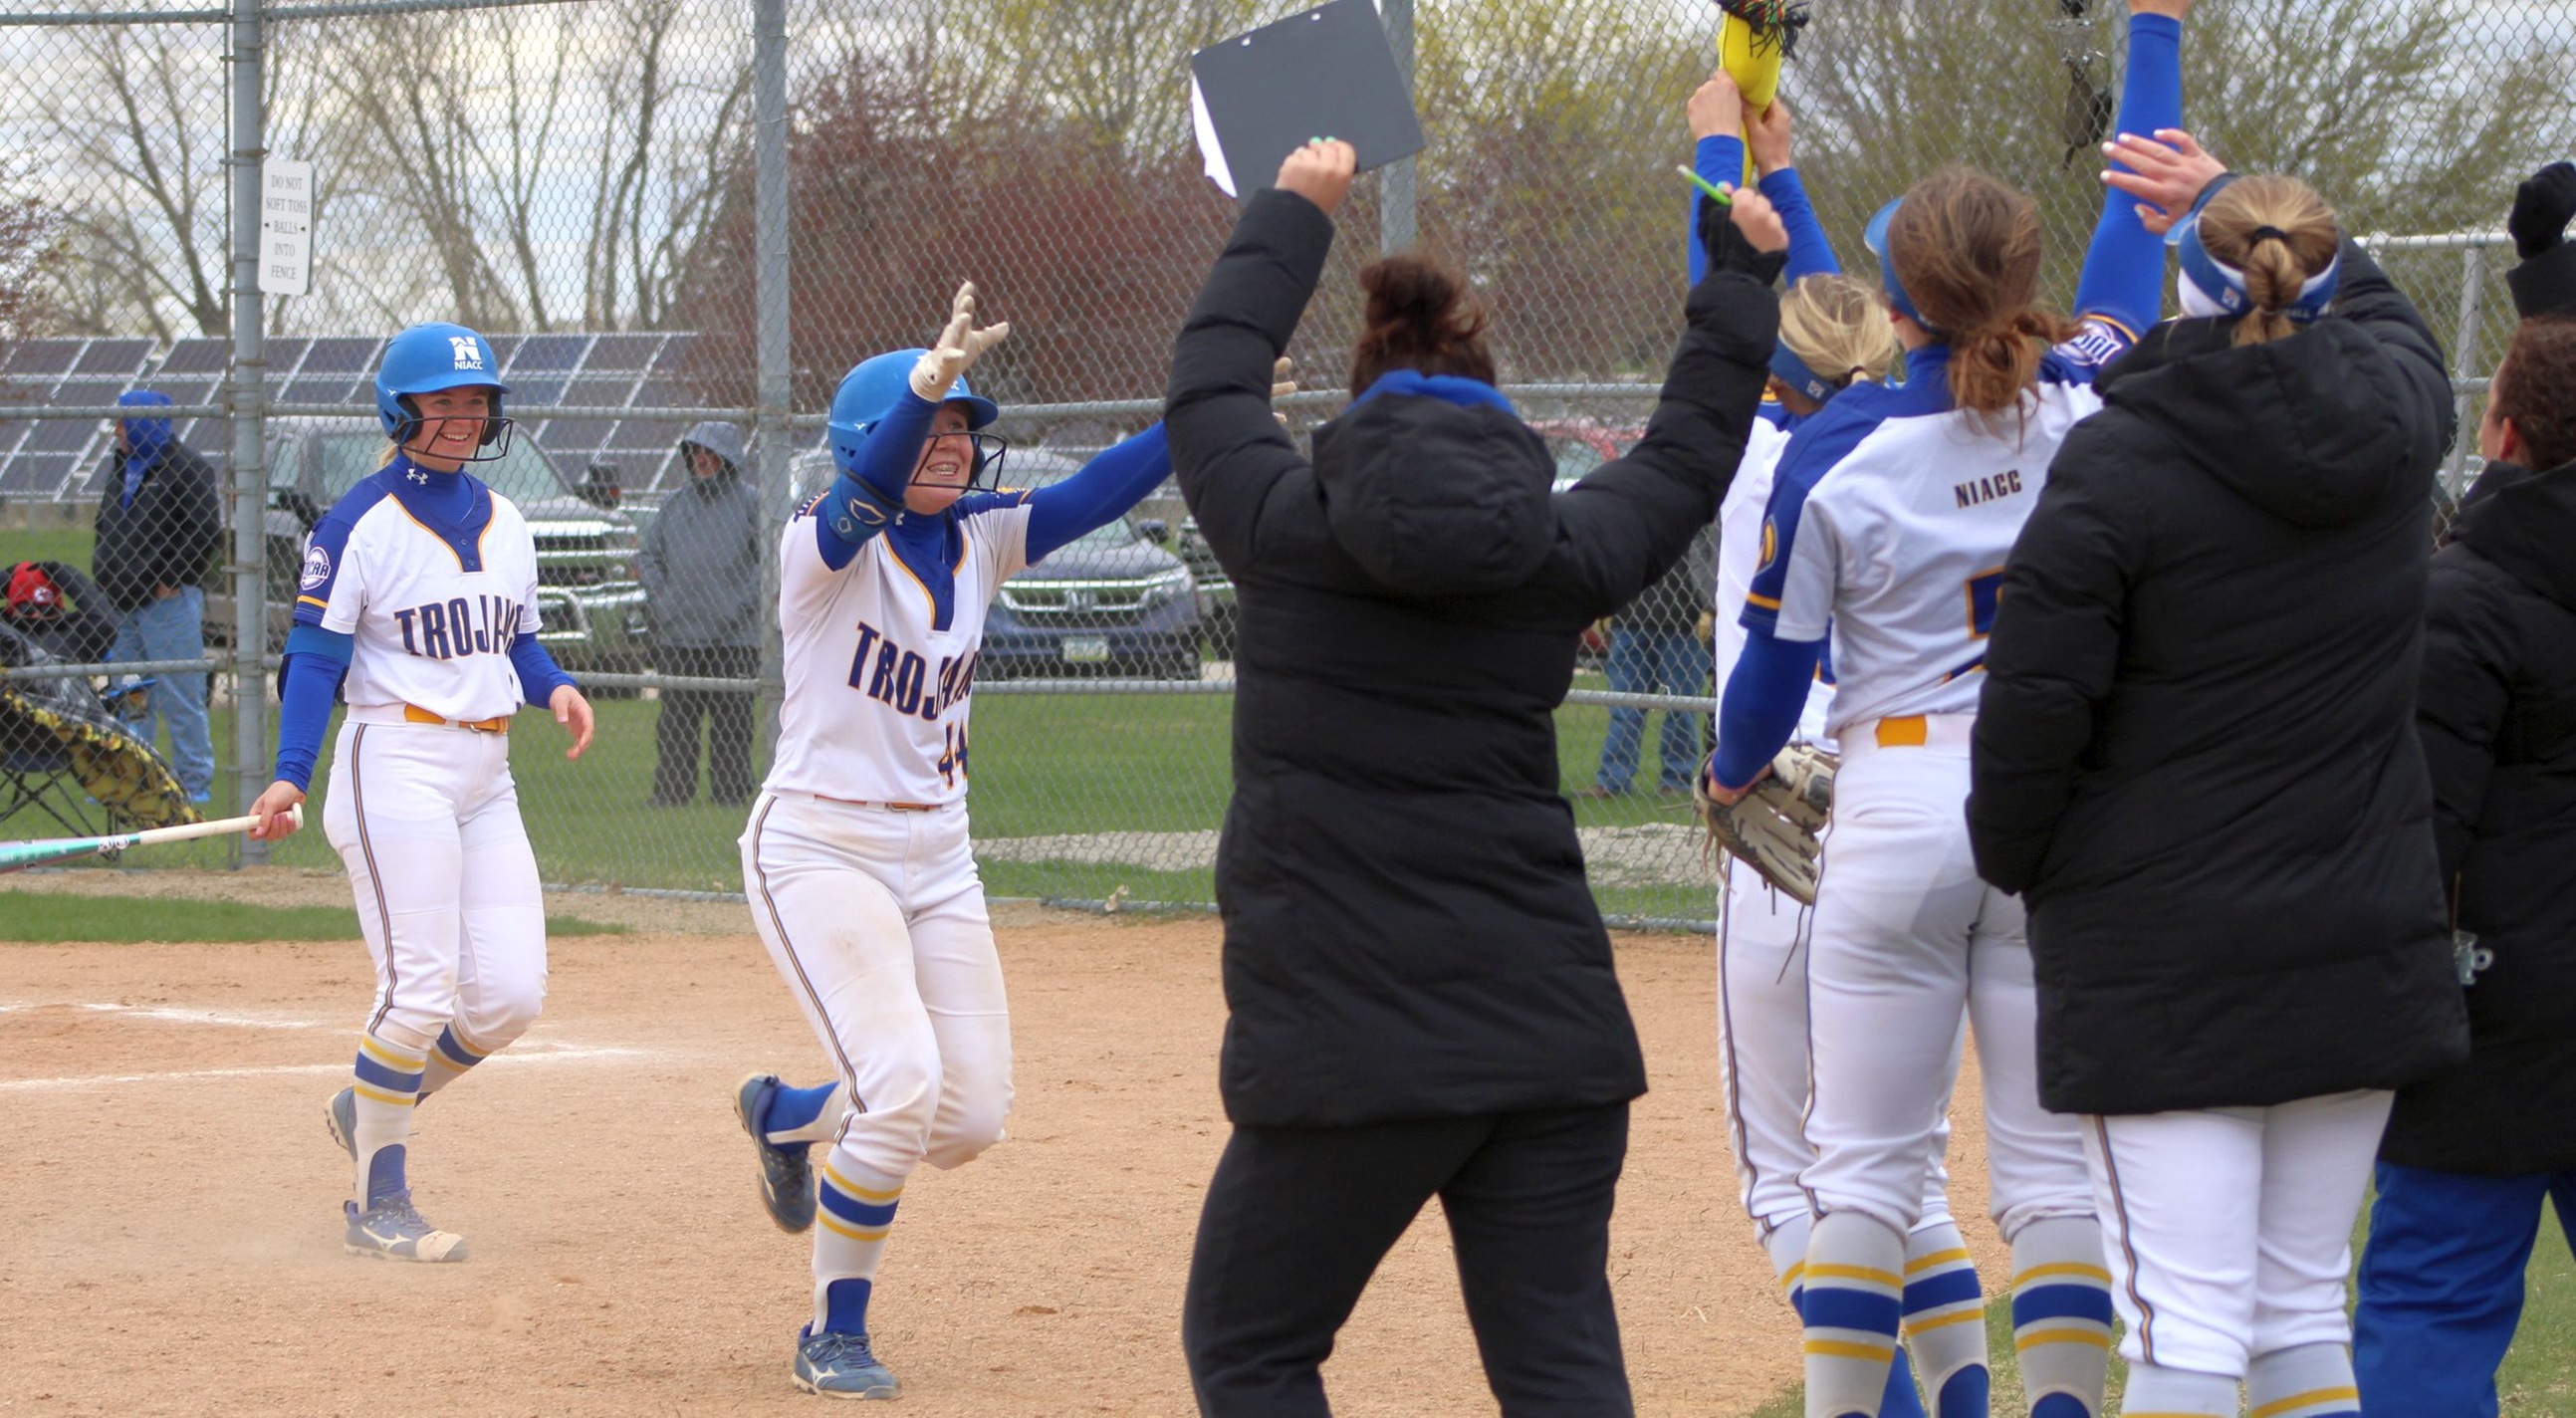 NIACC's Brianna McPoland celebrates a home run against Kirkwood last Sunday on the NIACC campus.